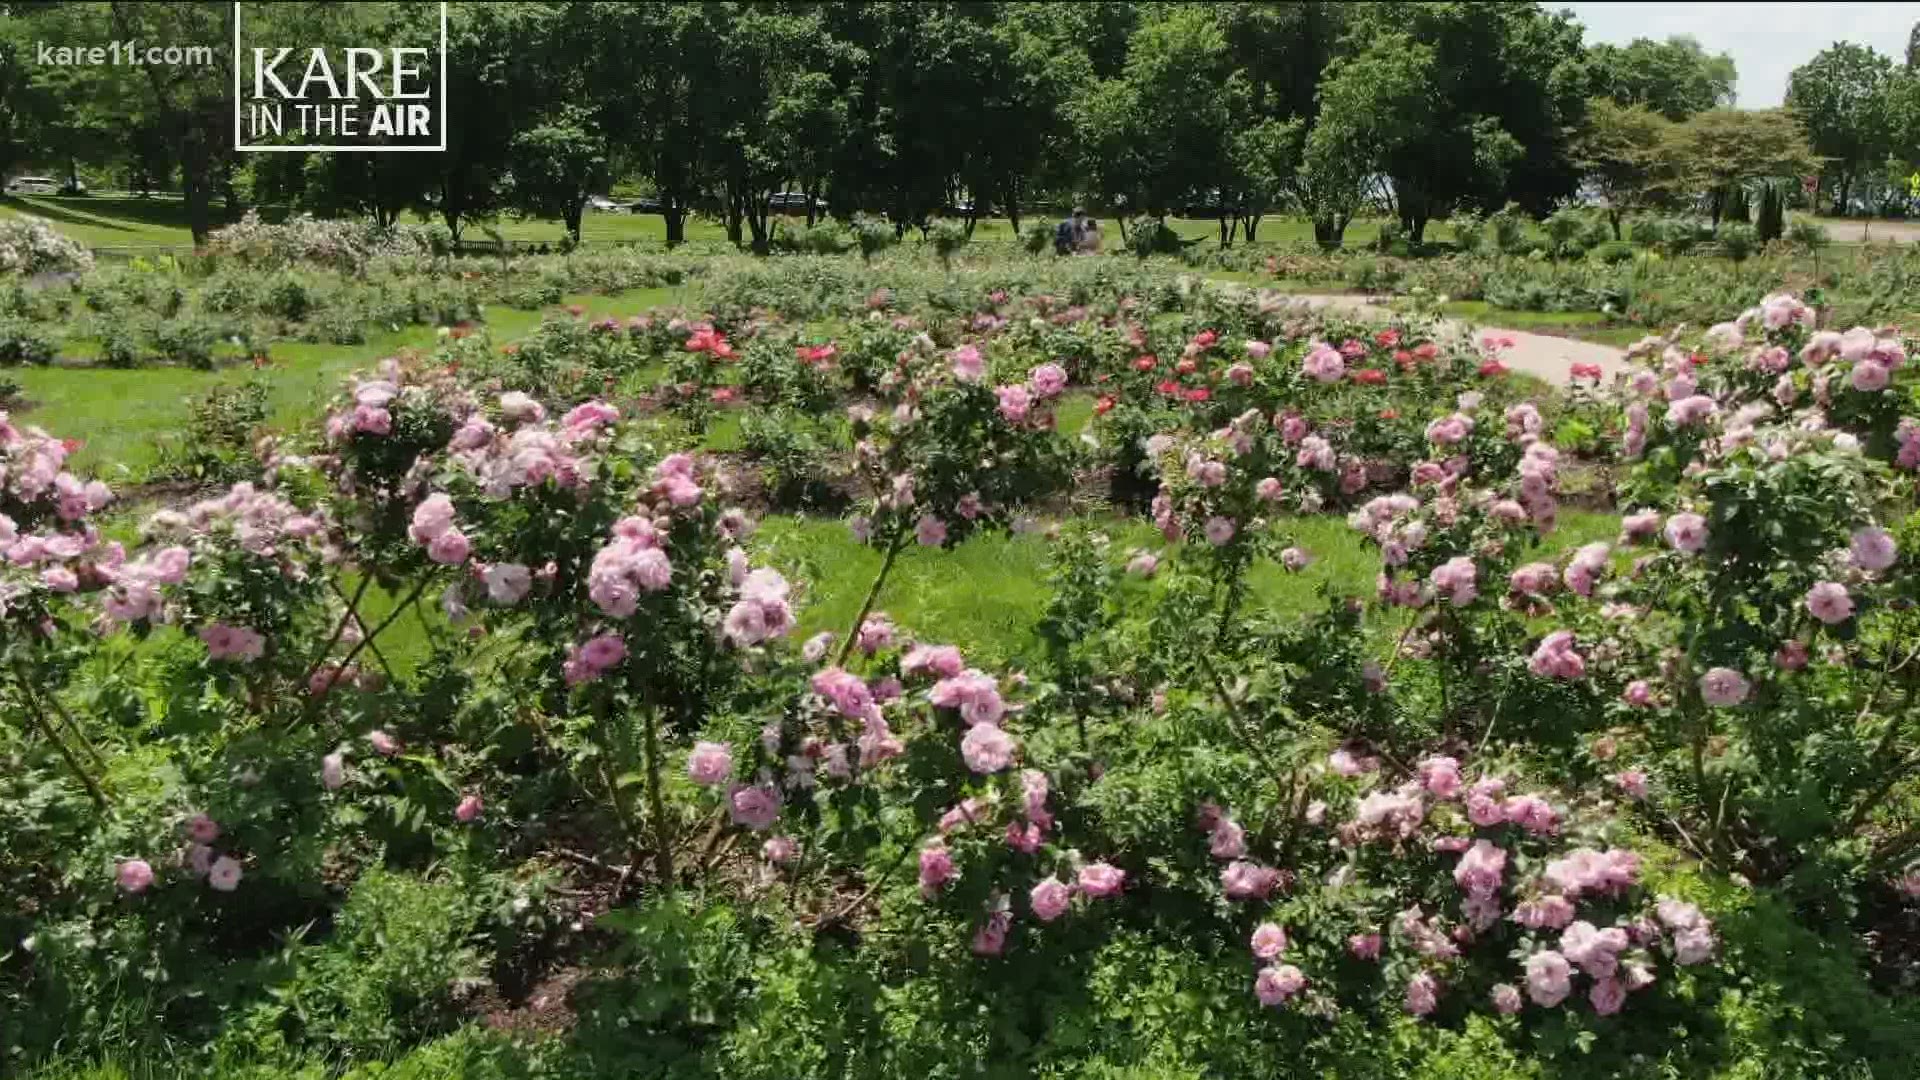 The Rose Garden is the second oldest public rose garden in the United States, and showcases 3,000 plants in 100 different varieties.